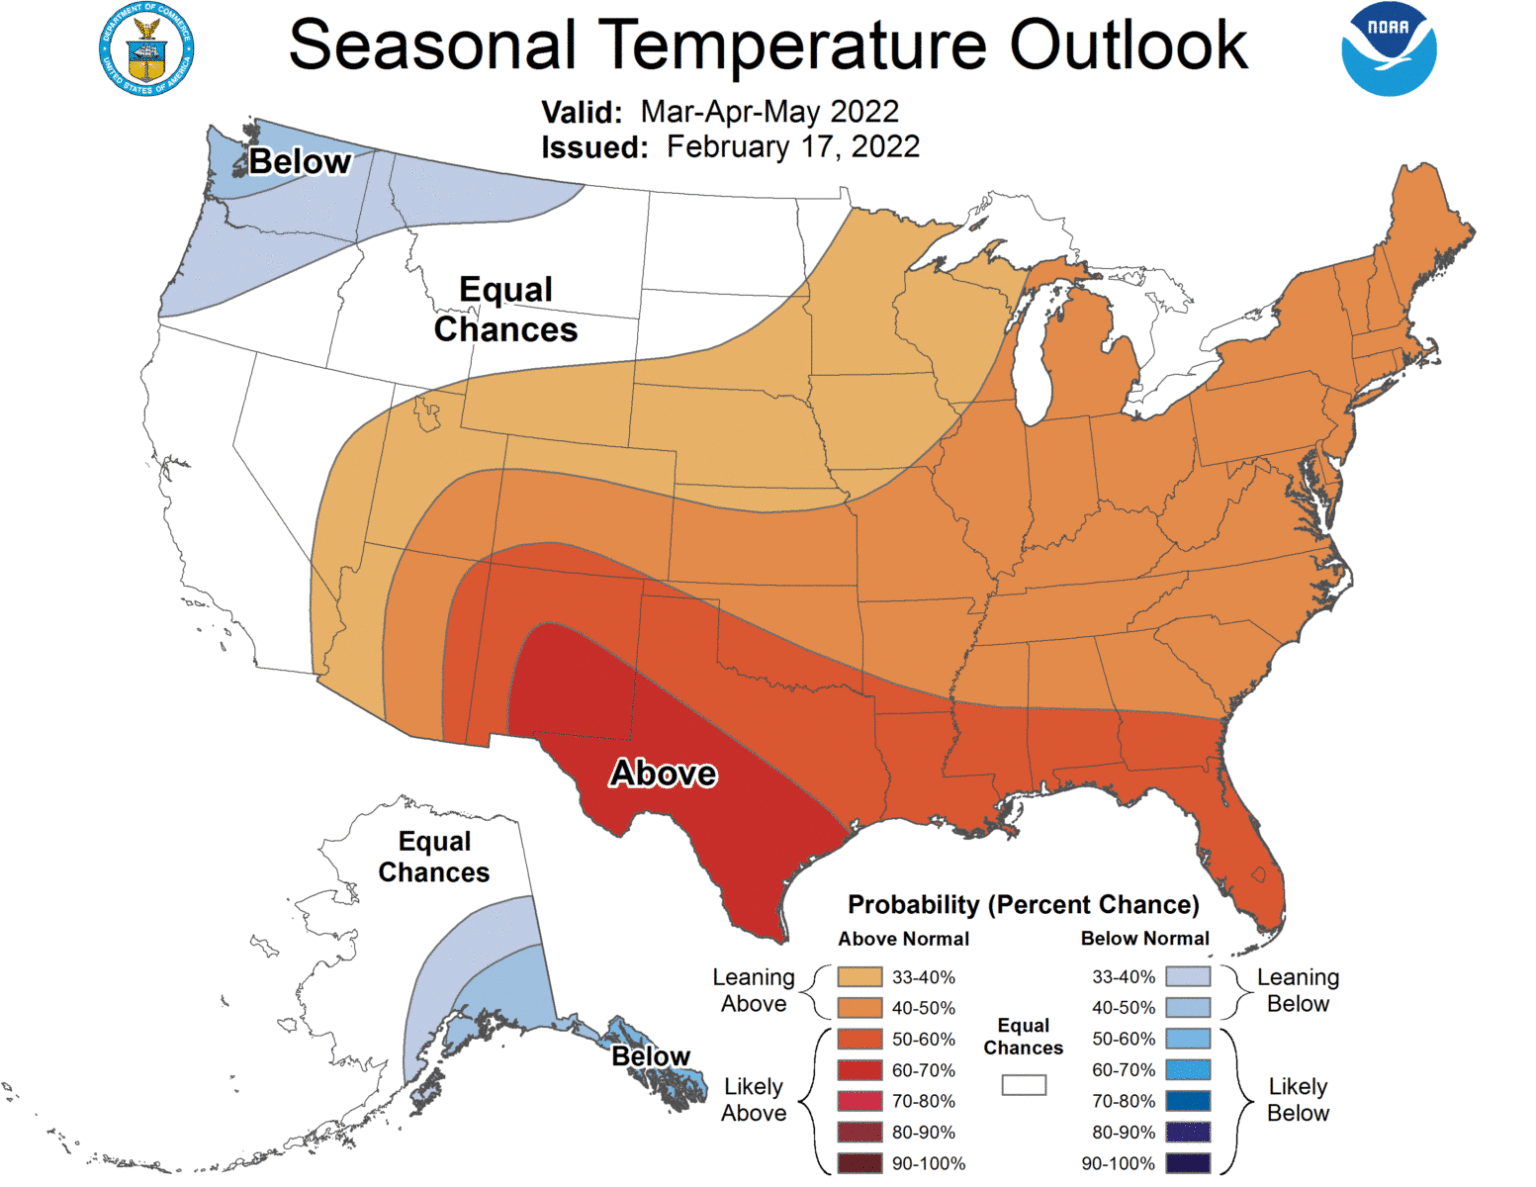 Seasonal temperature outlook for the U.S. from March through May